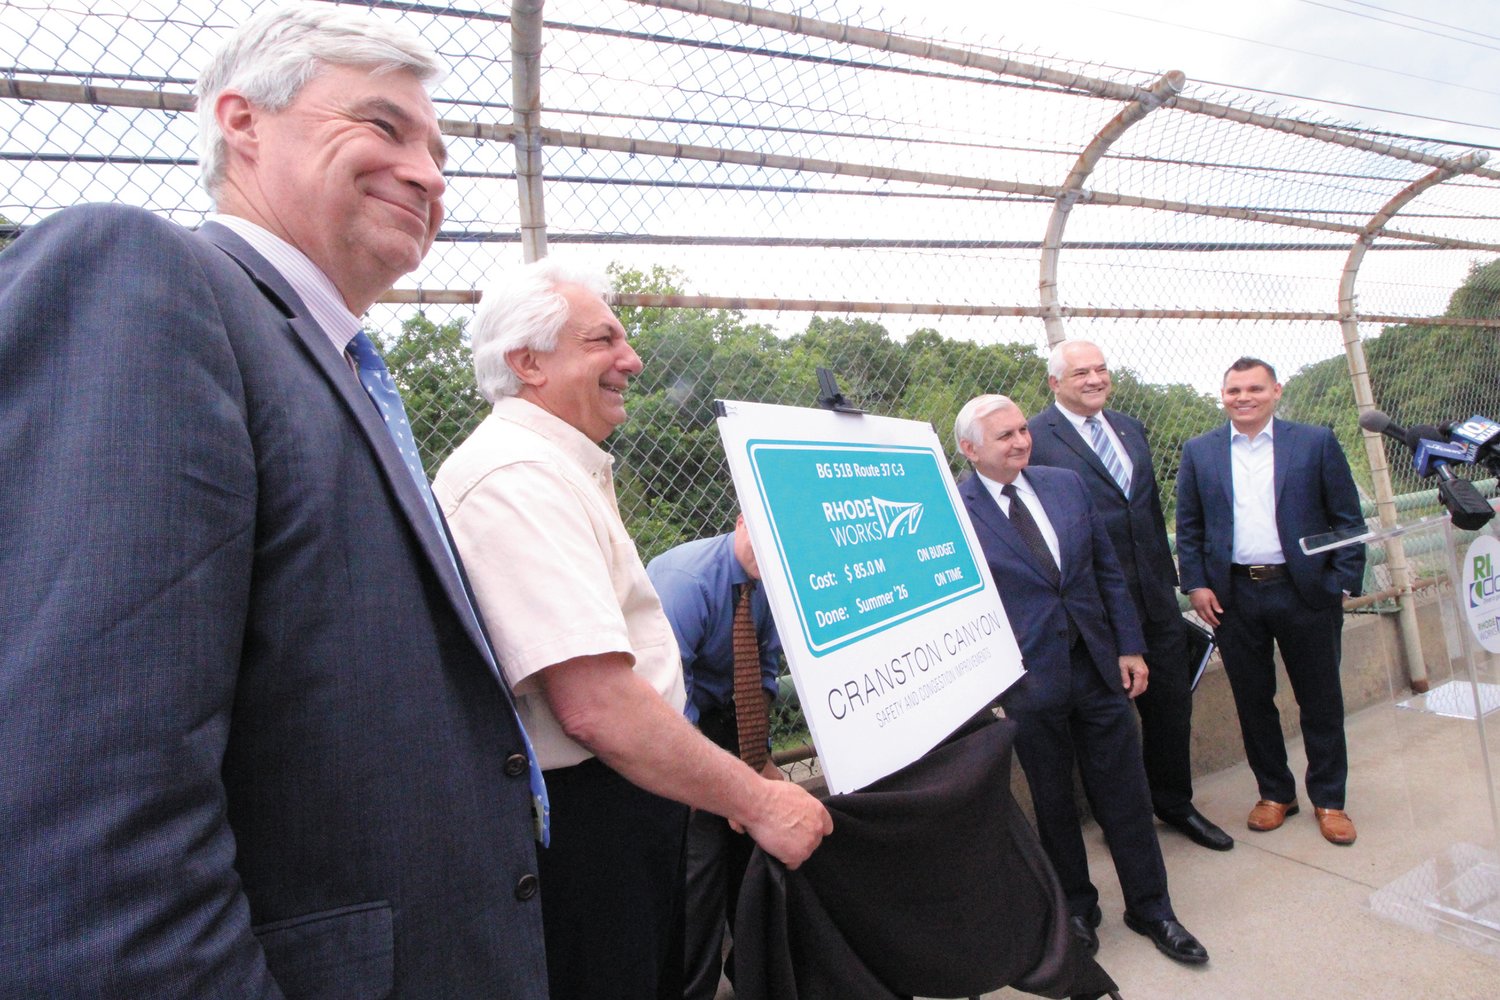 SIGNS OF WORK TO COME: On the Phenix Ave. bridge in Cranston overlooking Route 295, state and federal officials gathered Friday to announce the $85 million Cranston Canyon Project. Pictured are Senator Sheldon Whitehouse, DOT Director Peter Alviti, Senator Jack Reed, Carlos Machado, district director of the U. S. Department of Transportation Federal Highway Administration and Rep. Brandon Potter of Cranston. (Cranston Herald photo)